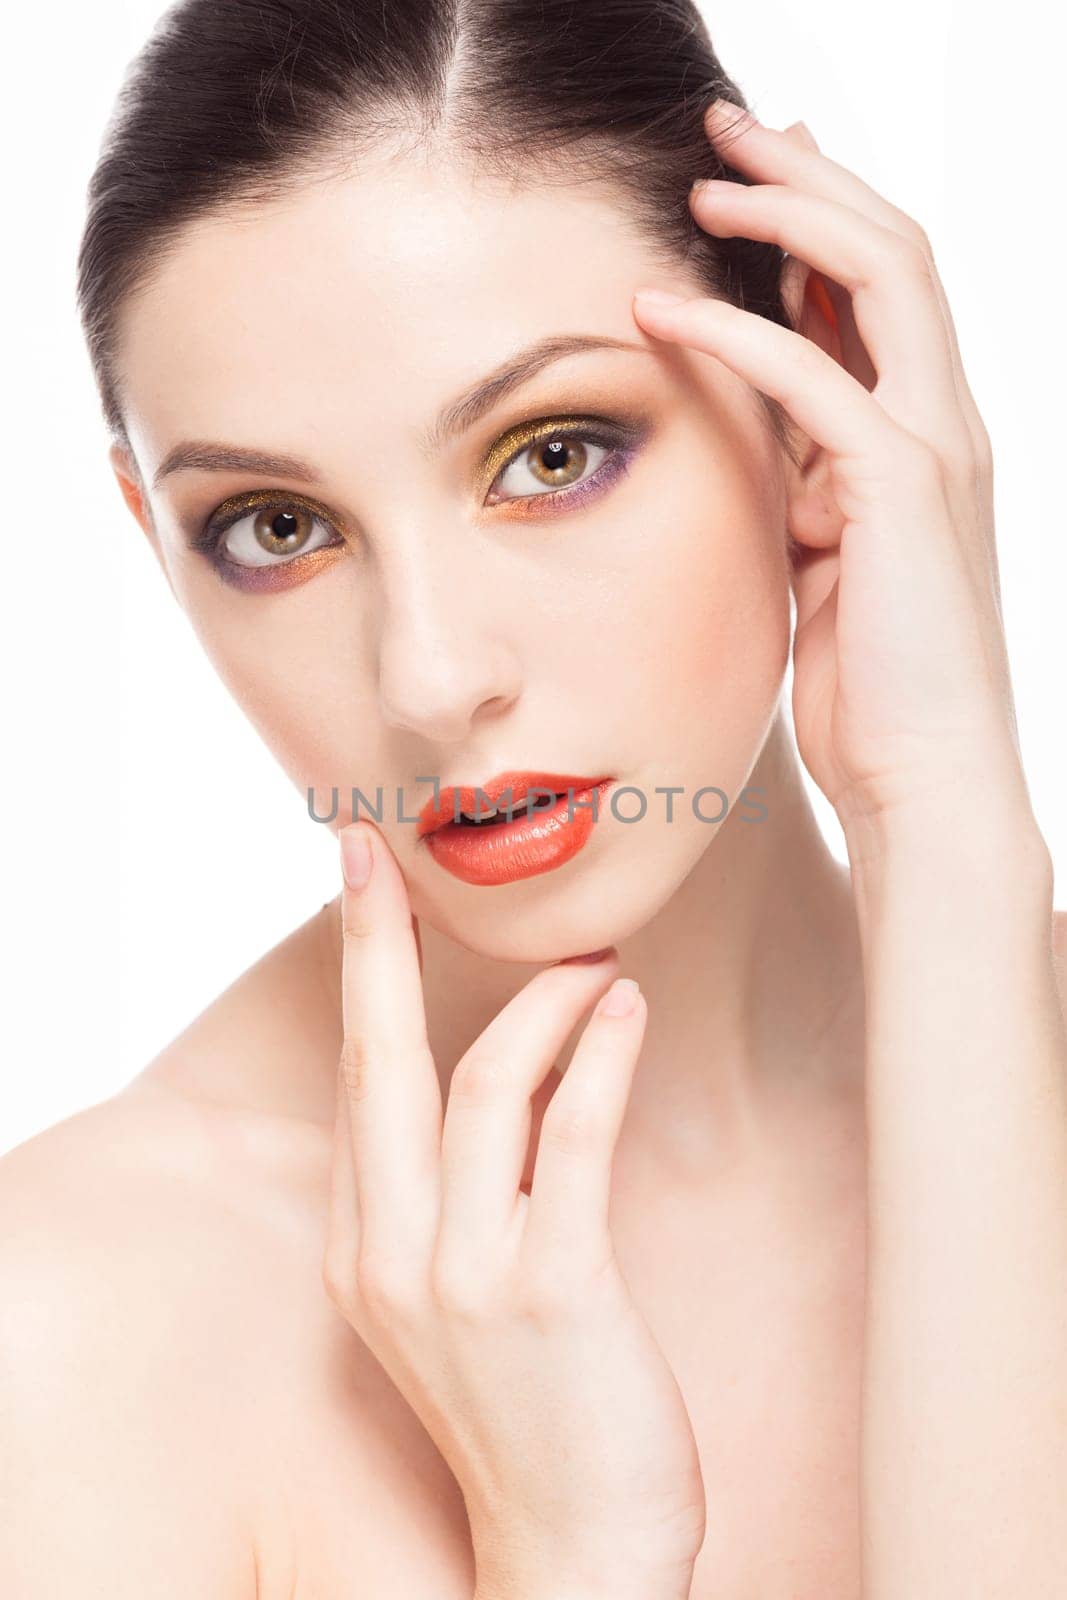 Beauty fashion girl. Portrait of beautiful young woman with fresh clean skin isolated on white Background.